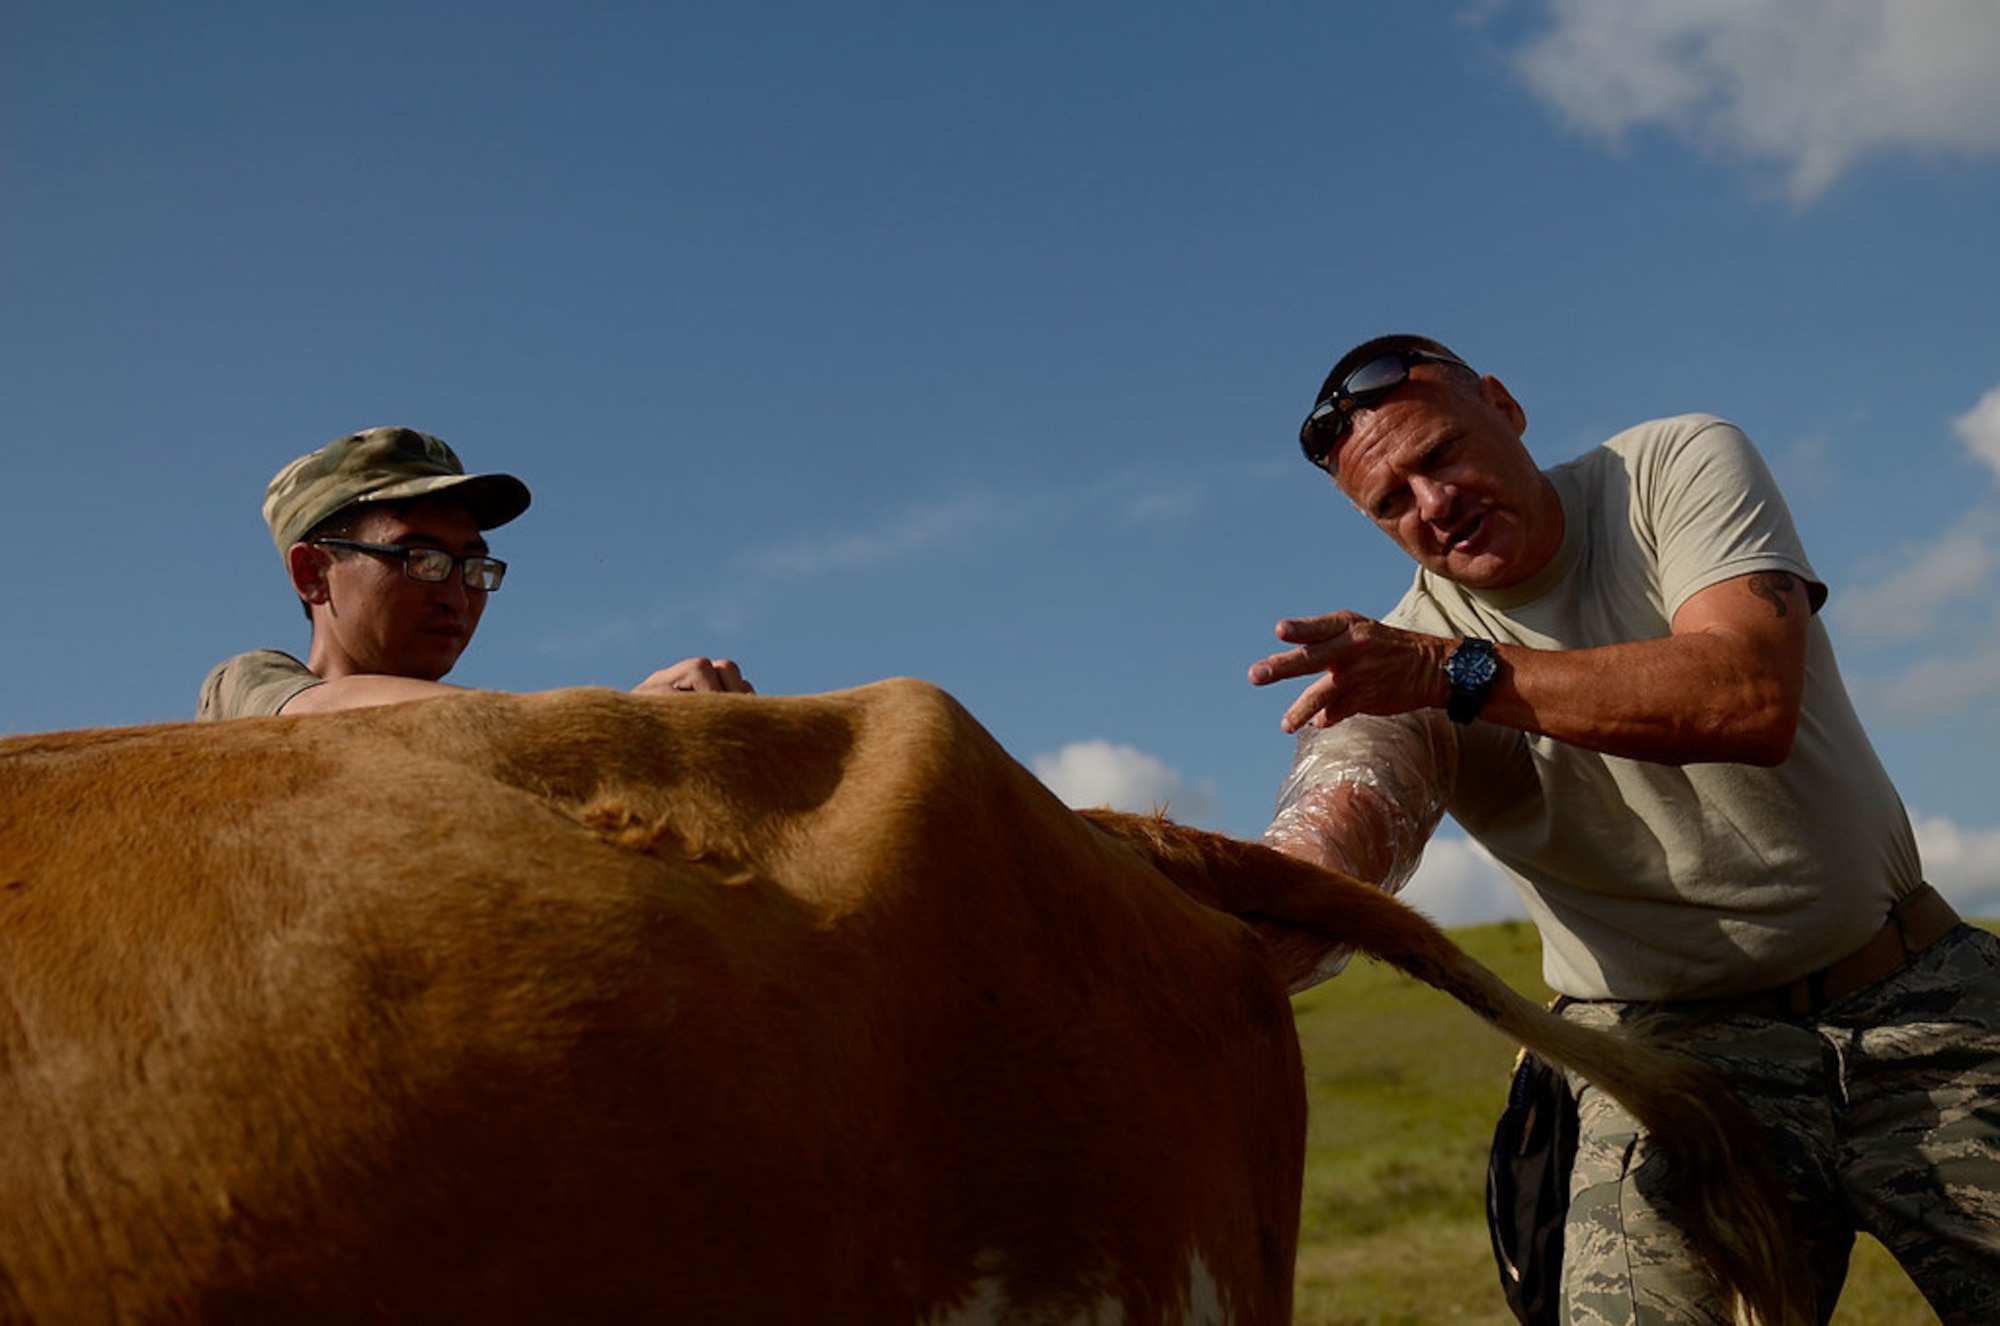 Lt. Col. Douglas Riley, a 13th AF/SGK international health specialist, and a veterinarian with the Mongolian Border Forces conducts a pregnancy check on a cow in northeastern Mongolia near the Russian border. By performing these routine checks it allows the herders to better track and care for their animals.(U.S. Air Force photo/Master Sgt. Jeremy T. Lock)